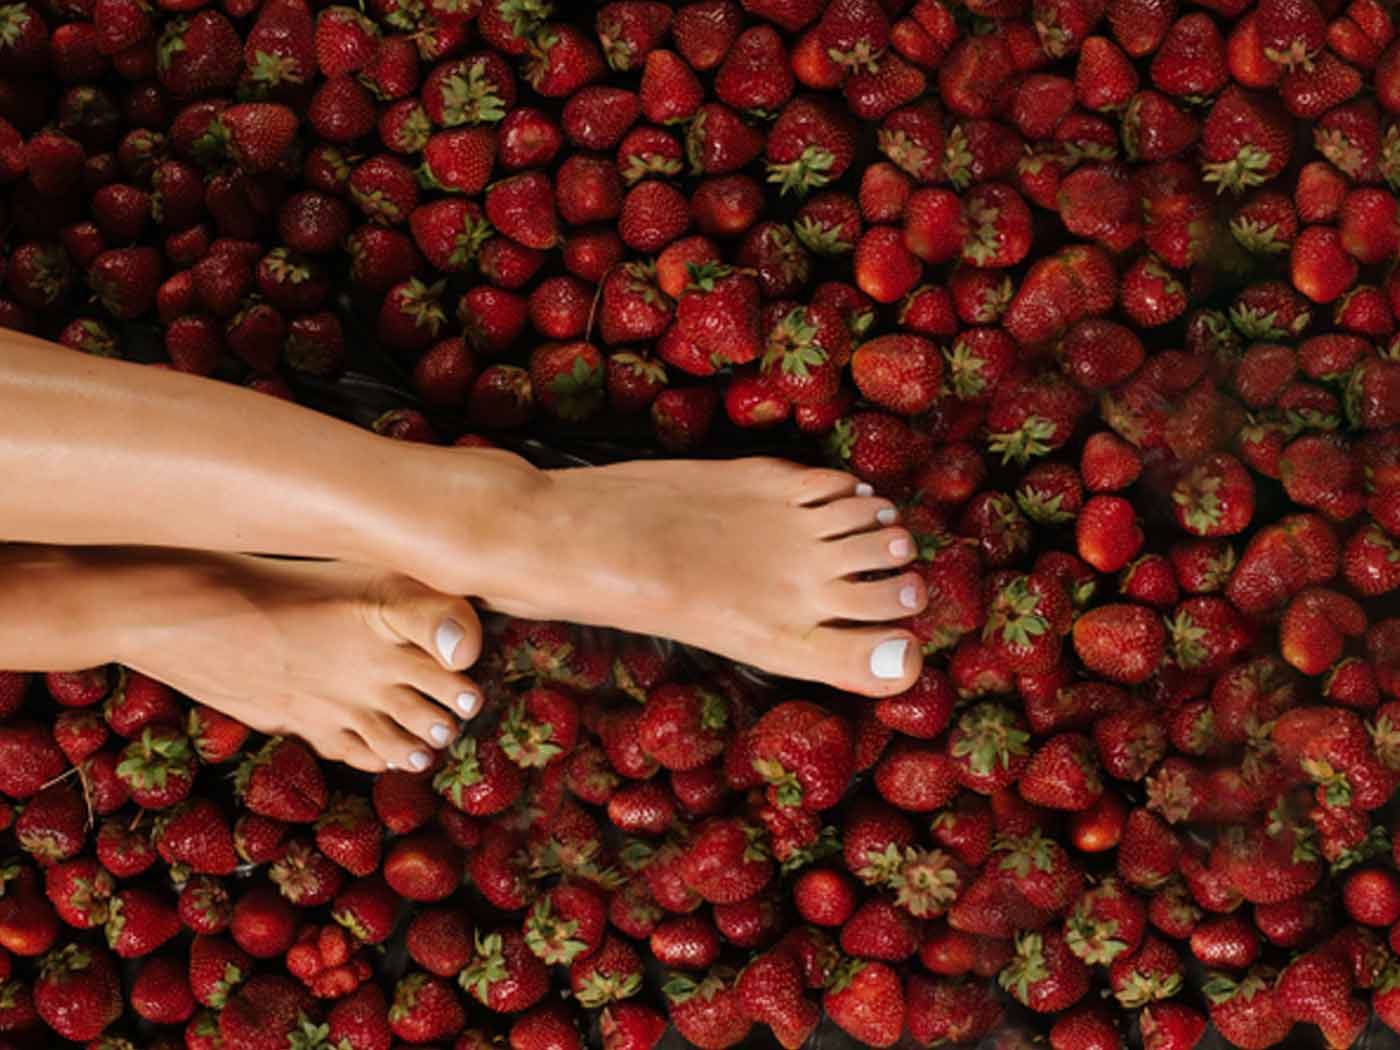 How to get rid of Strawberry legs